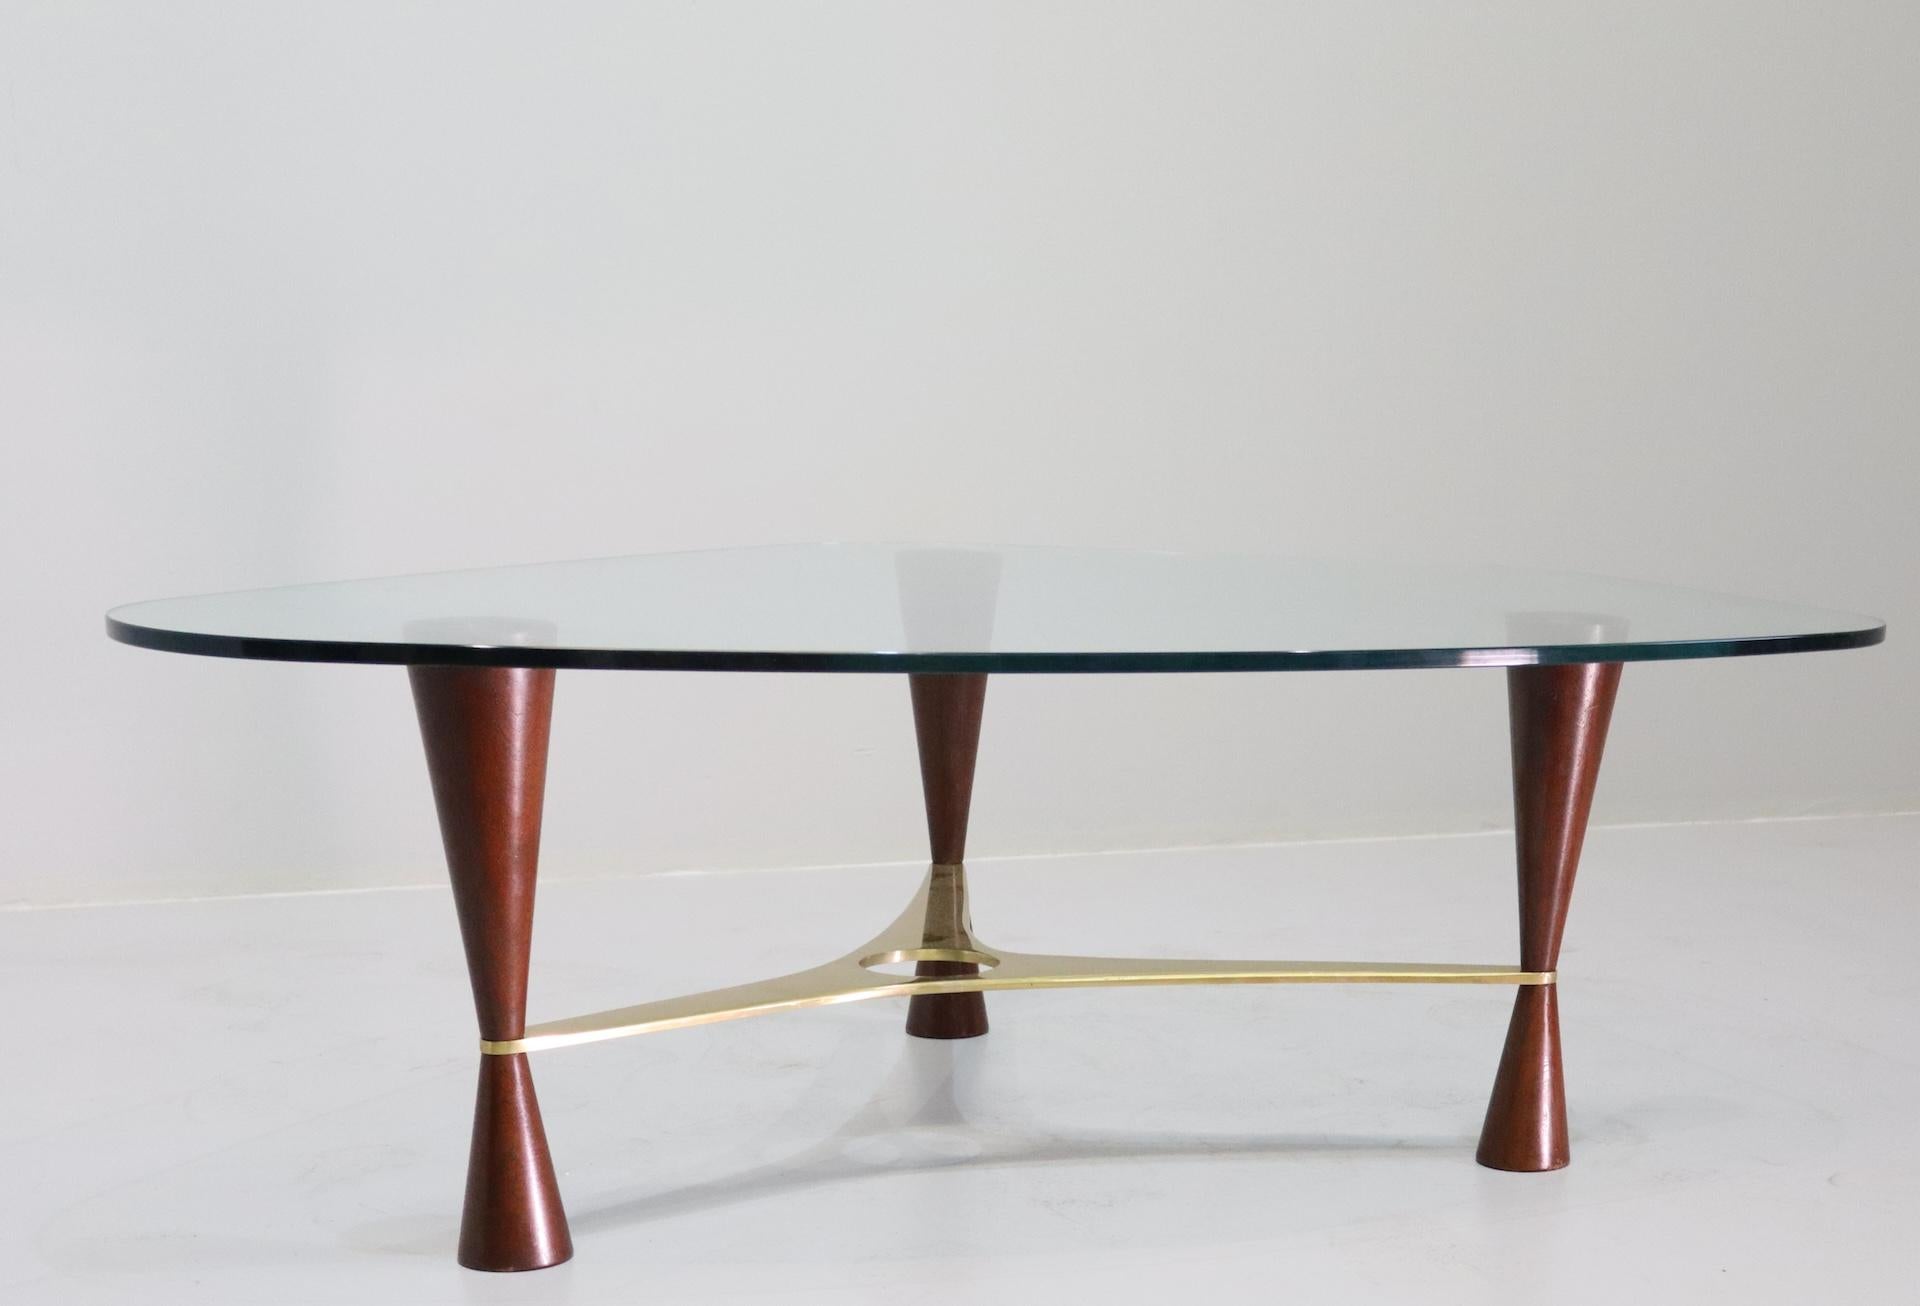 Model 5309 rare coffee table by Edward Wormley for Dunbar. Combination of Wood and brass with the original glass top.